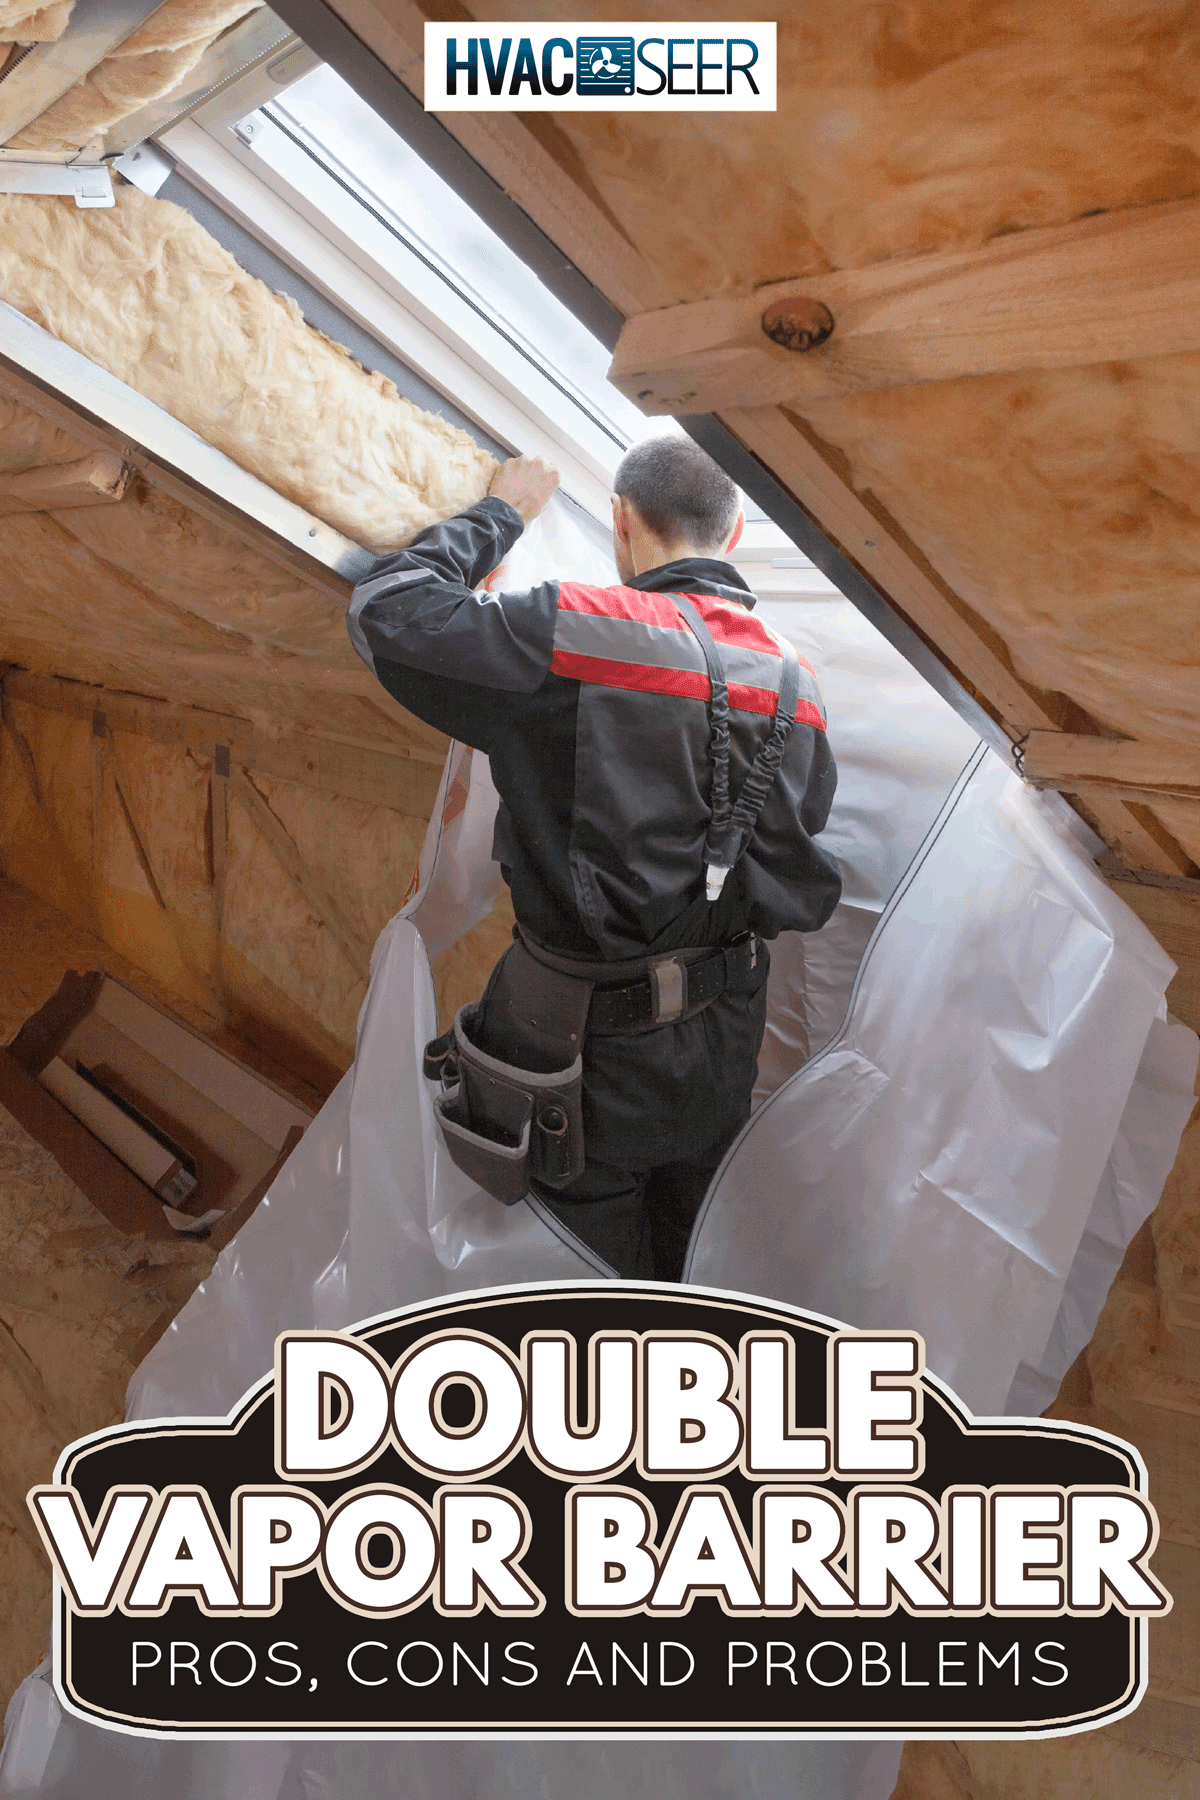 Worker installing vapor barrier around the skylight opening in attic, Double Vapor Barrier: Pros, Cons And Problems